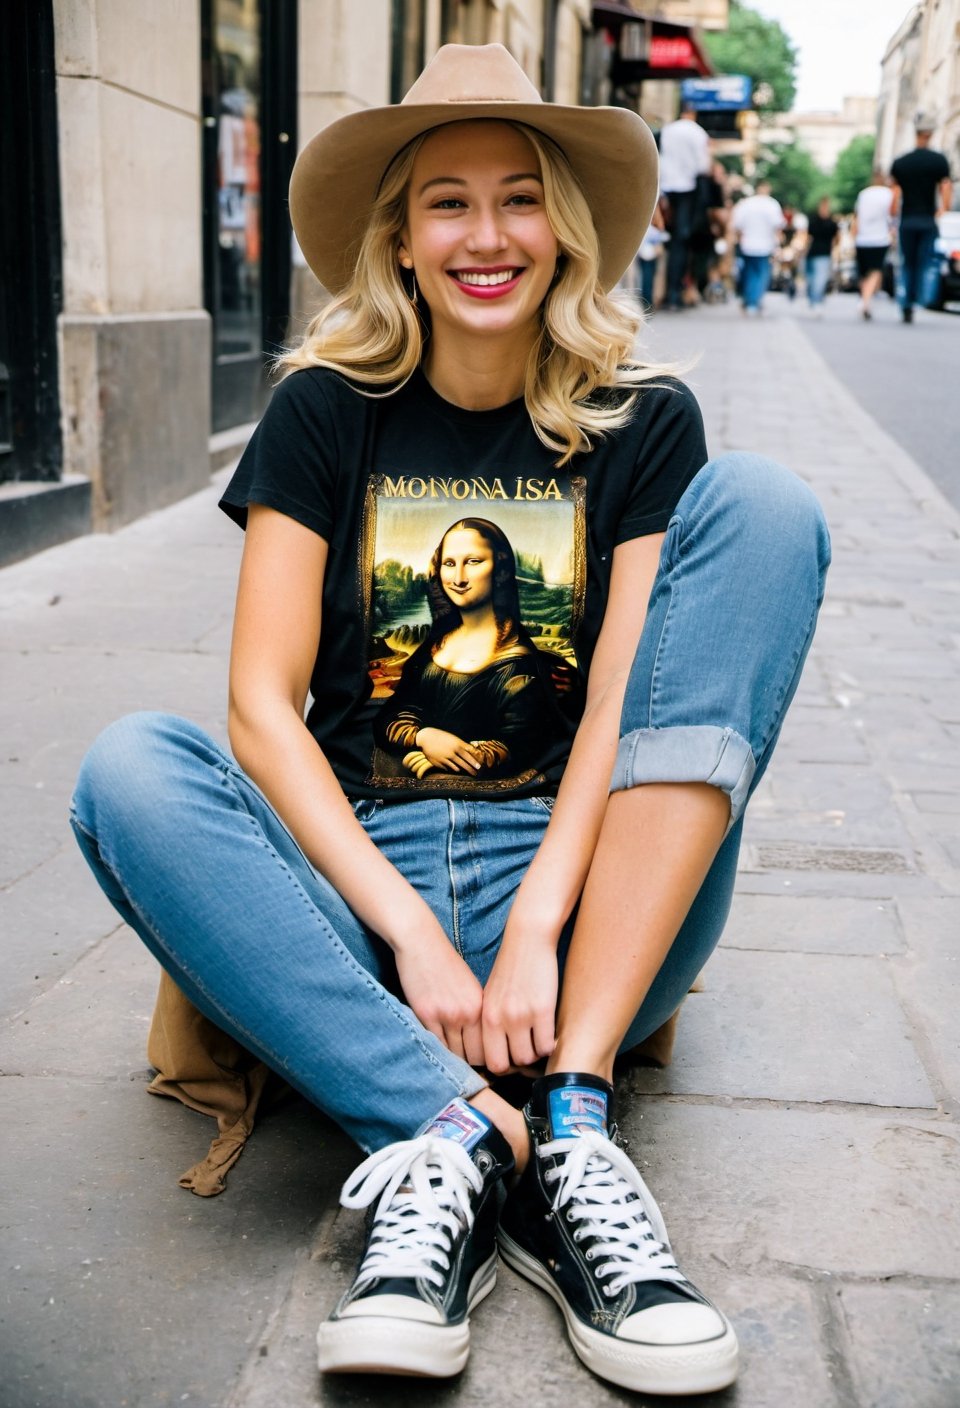 Candid Street photo. Shot from the ground up of a happy blonde woman, cowboy hat, natural relaxed pose, sitting on the pavement, wearing a T-Shirt with Mona Lisa. Style by J.C. Leyendecker. Canon 5d Mark 4, Kodak Ektar, 35mm
BREAK
Candid street photography. Shot from the ground a cheerful blonde woman, cowboy hat, sitting casually on the pavement in a relaxed pose, wearing a T-shirt featuring the Mona Lisa.
BREAK
Casual street scene. A happy blonde woman captured from ground, cowboy hat, sitting naturally on the pavement in a T-shirt adorned with the Mona Lisa, exuding a relaxed vibe.
BREAK
Street candid shot. A blonde woman in cowboy hat Shot from the ground, sitting comfortably on the pavement, radiating happiness in a Mona Lisa T-shirt.
BREAK
Candid street photo. shot from below A cheerful blonde woman, cowboy hat, sitting on the pavement in a natural, relaxed manner, wearing a T-shirt with the Mona Lisa on it.
BREAK
Urban candid photo. Below angle of a happy blonde woman, cowboy hat, sitting relaxed on the pavement, sporting a T-shirt with a Mona Lisa print.